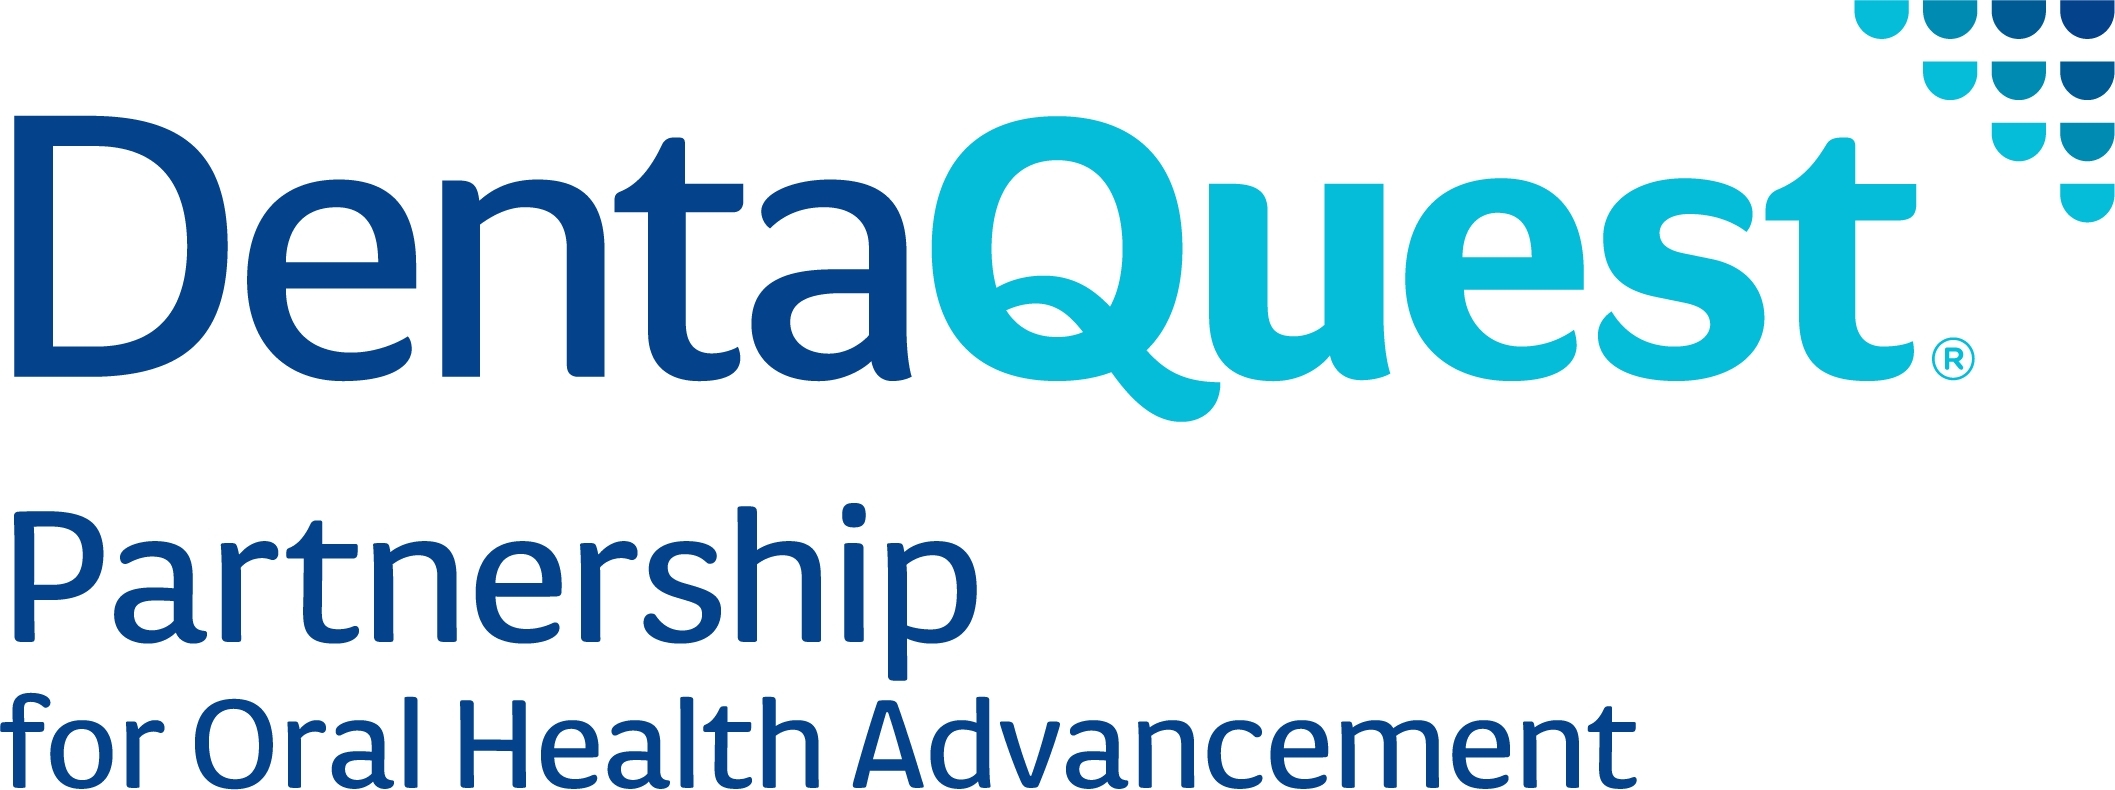 Dentaquest Partnership For Oral Health Advancement Invests 1m